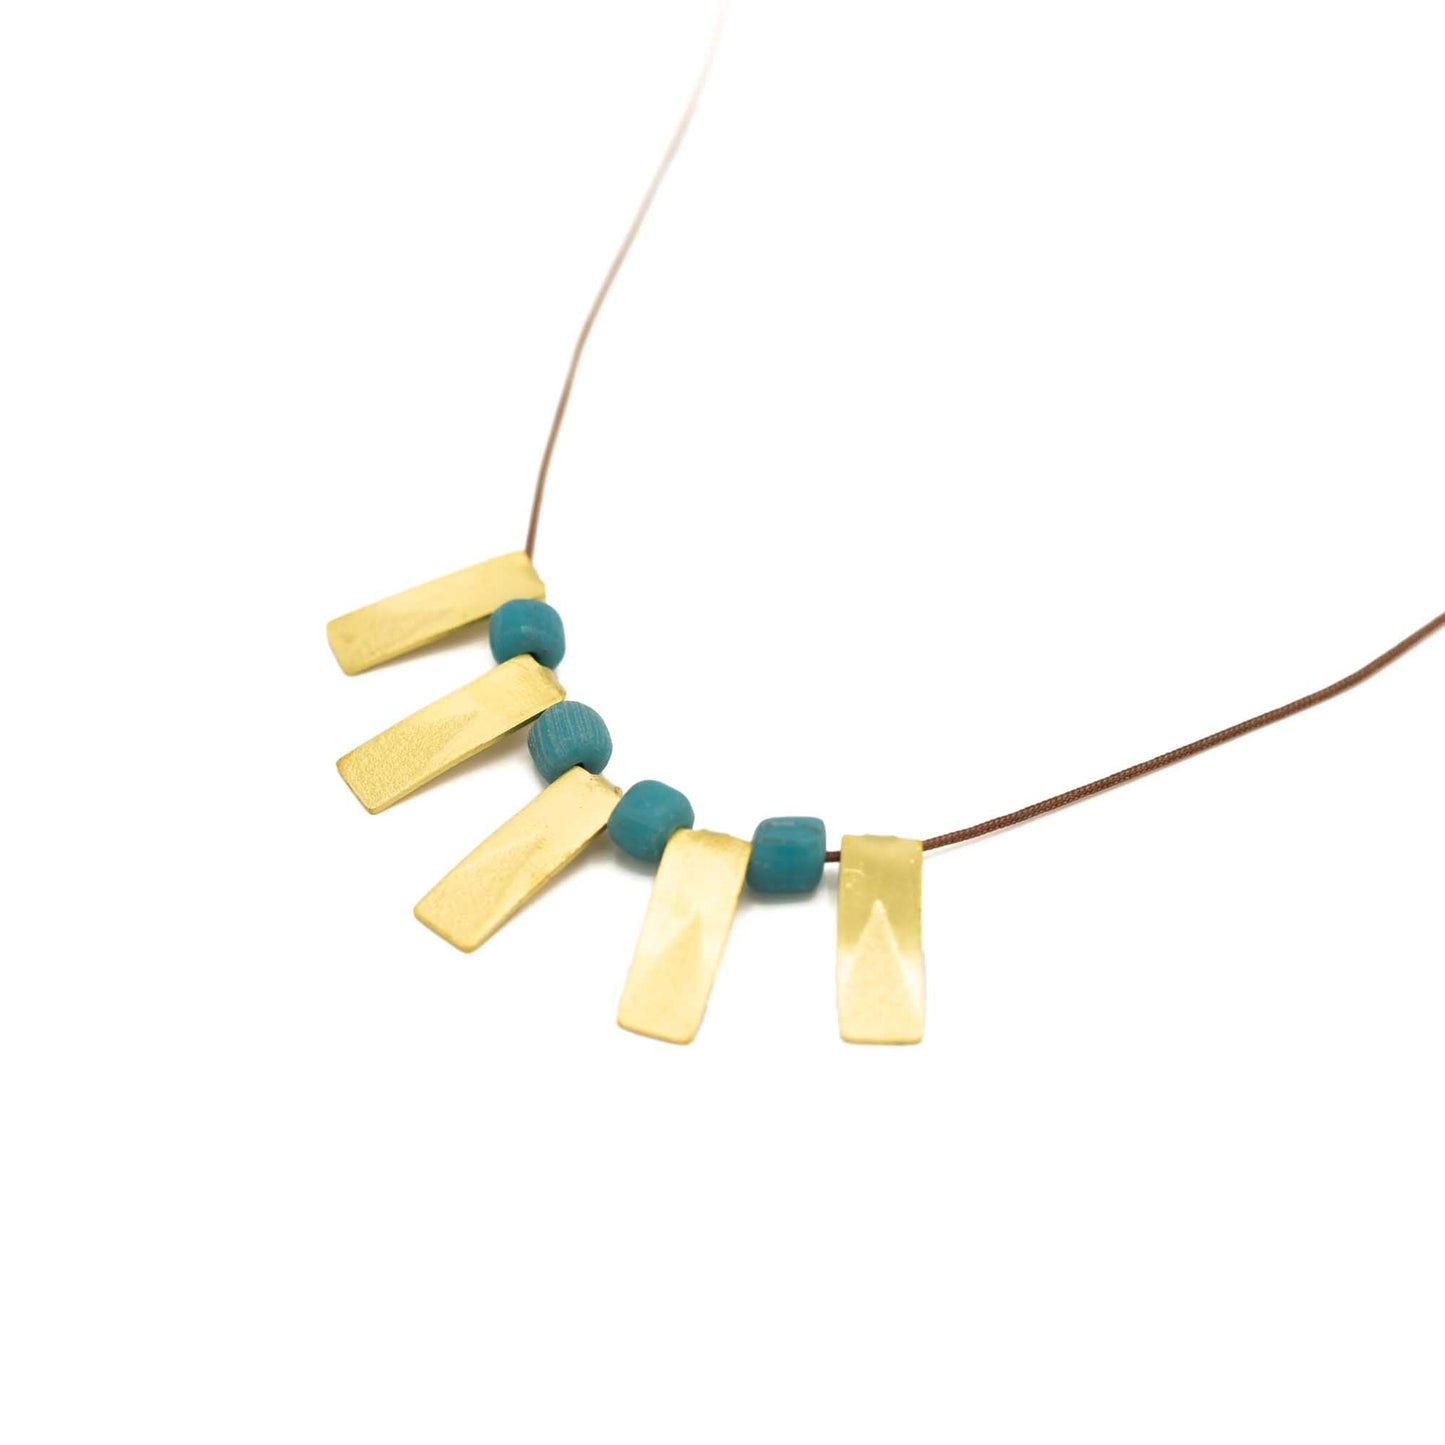 Five brass rectangular pendants with a turquoise glass bead between each. Brown string and presented at an angle against a white background.